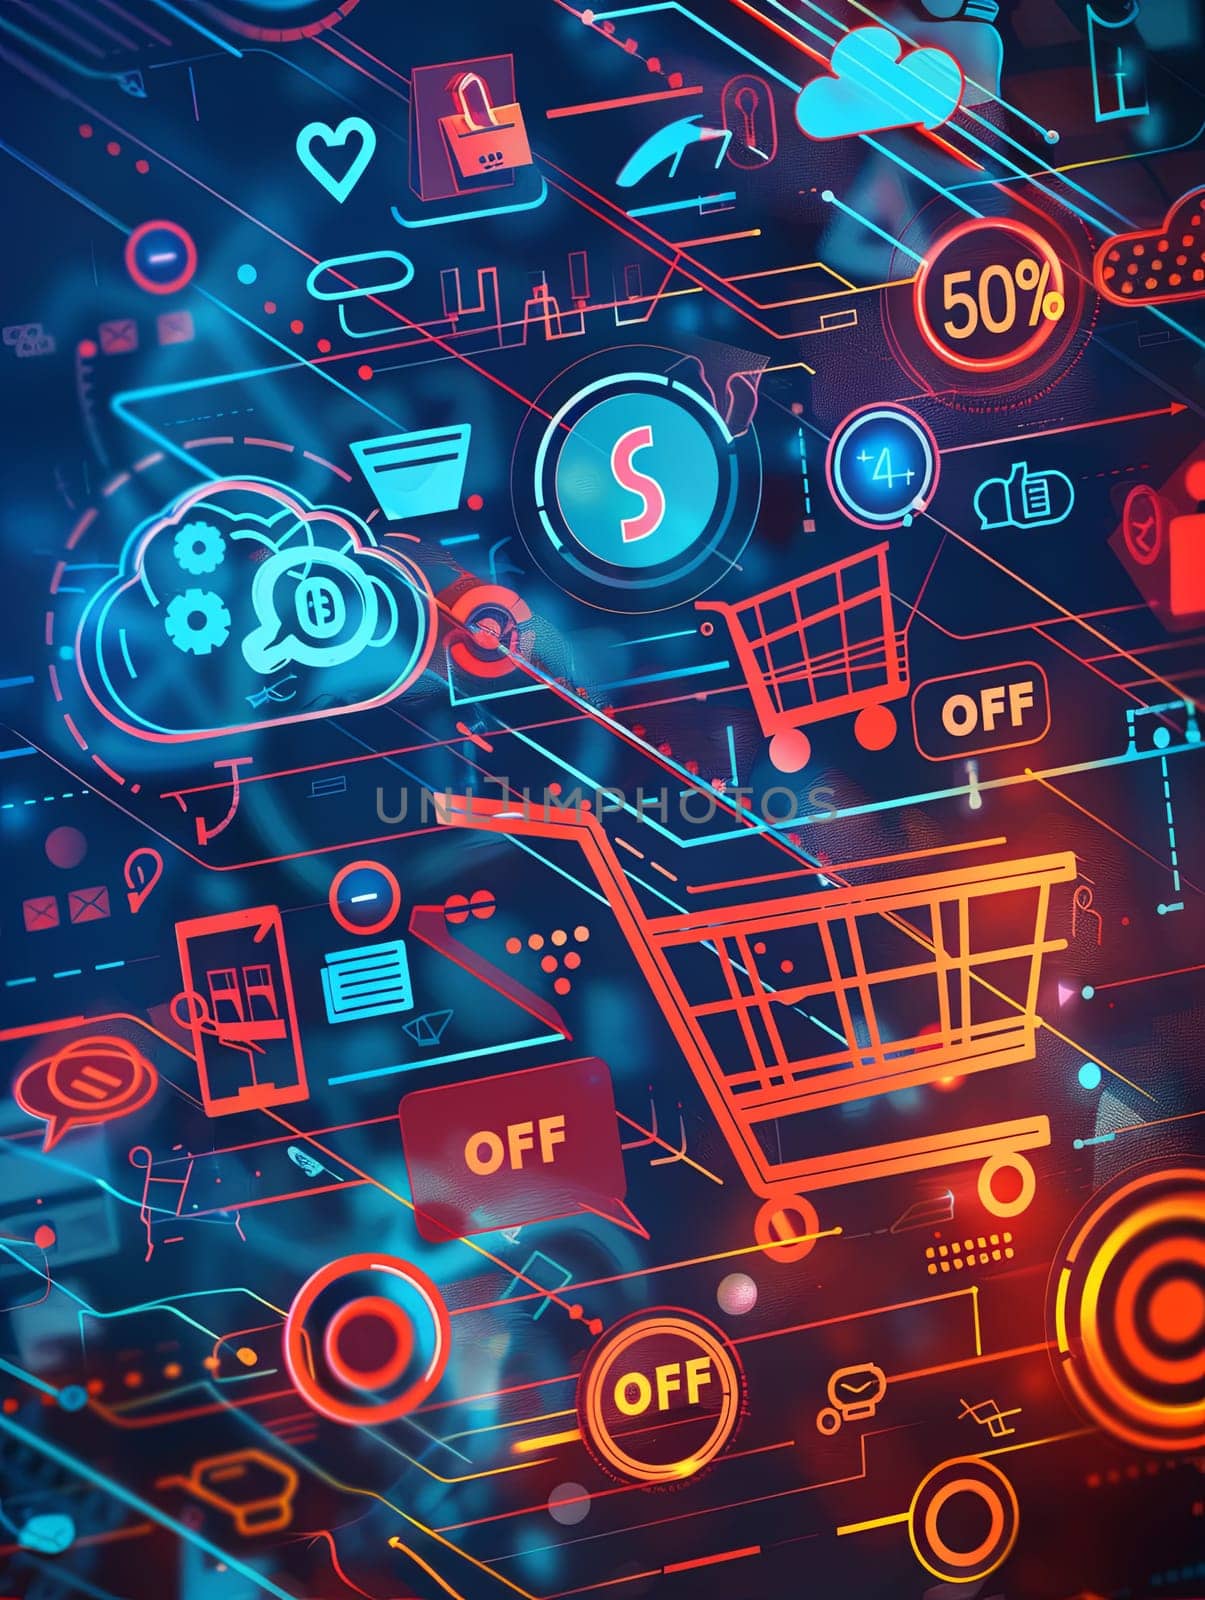 A vibrant abstract background depicting online shopping with digital shopping carts, product icons, and bold 50% OFF text, all within a futuristic digital theme.